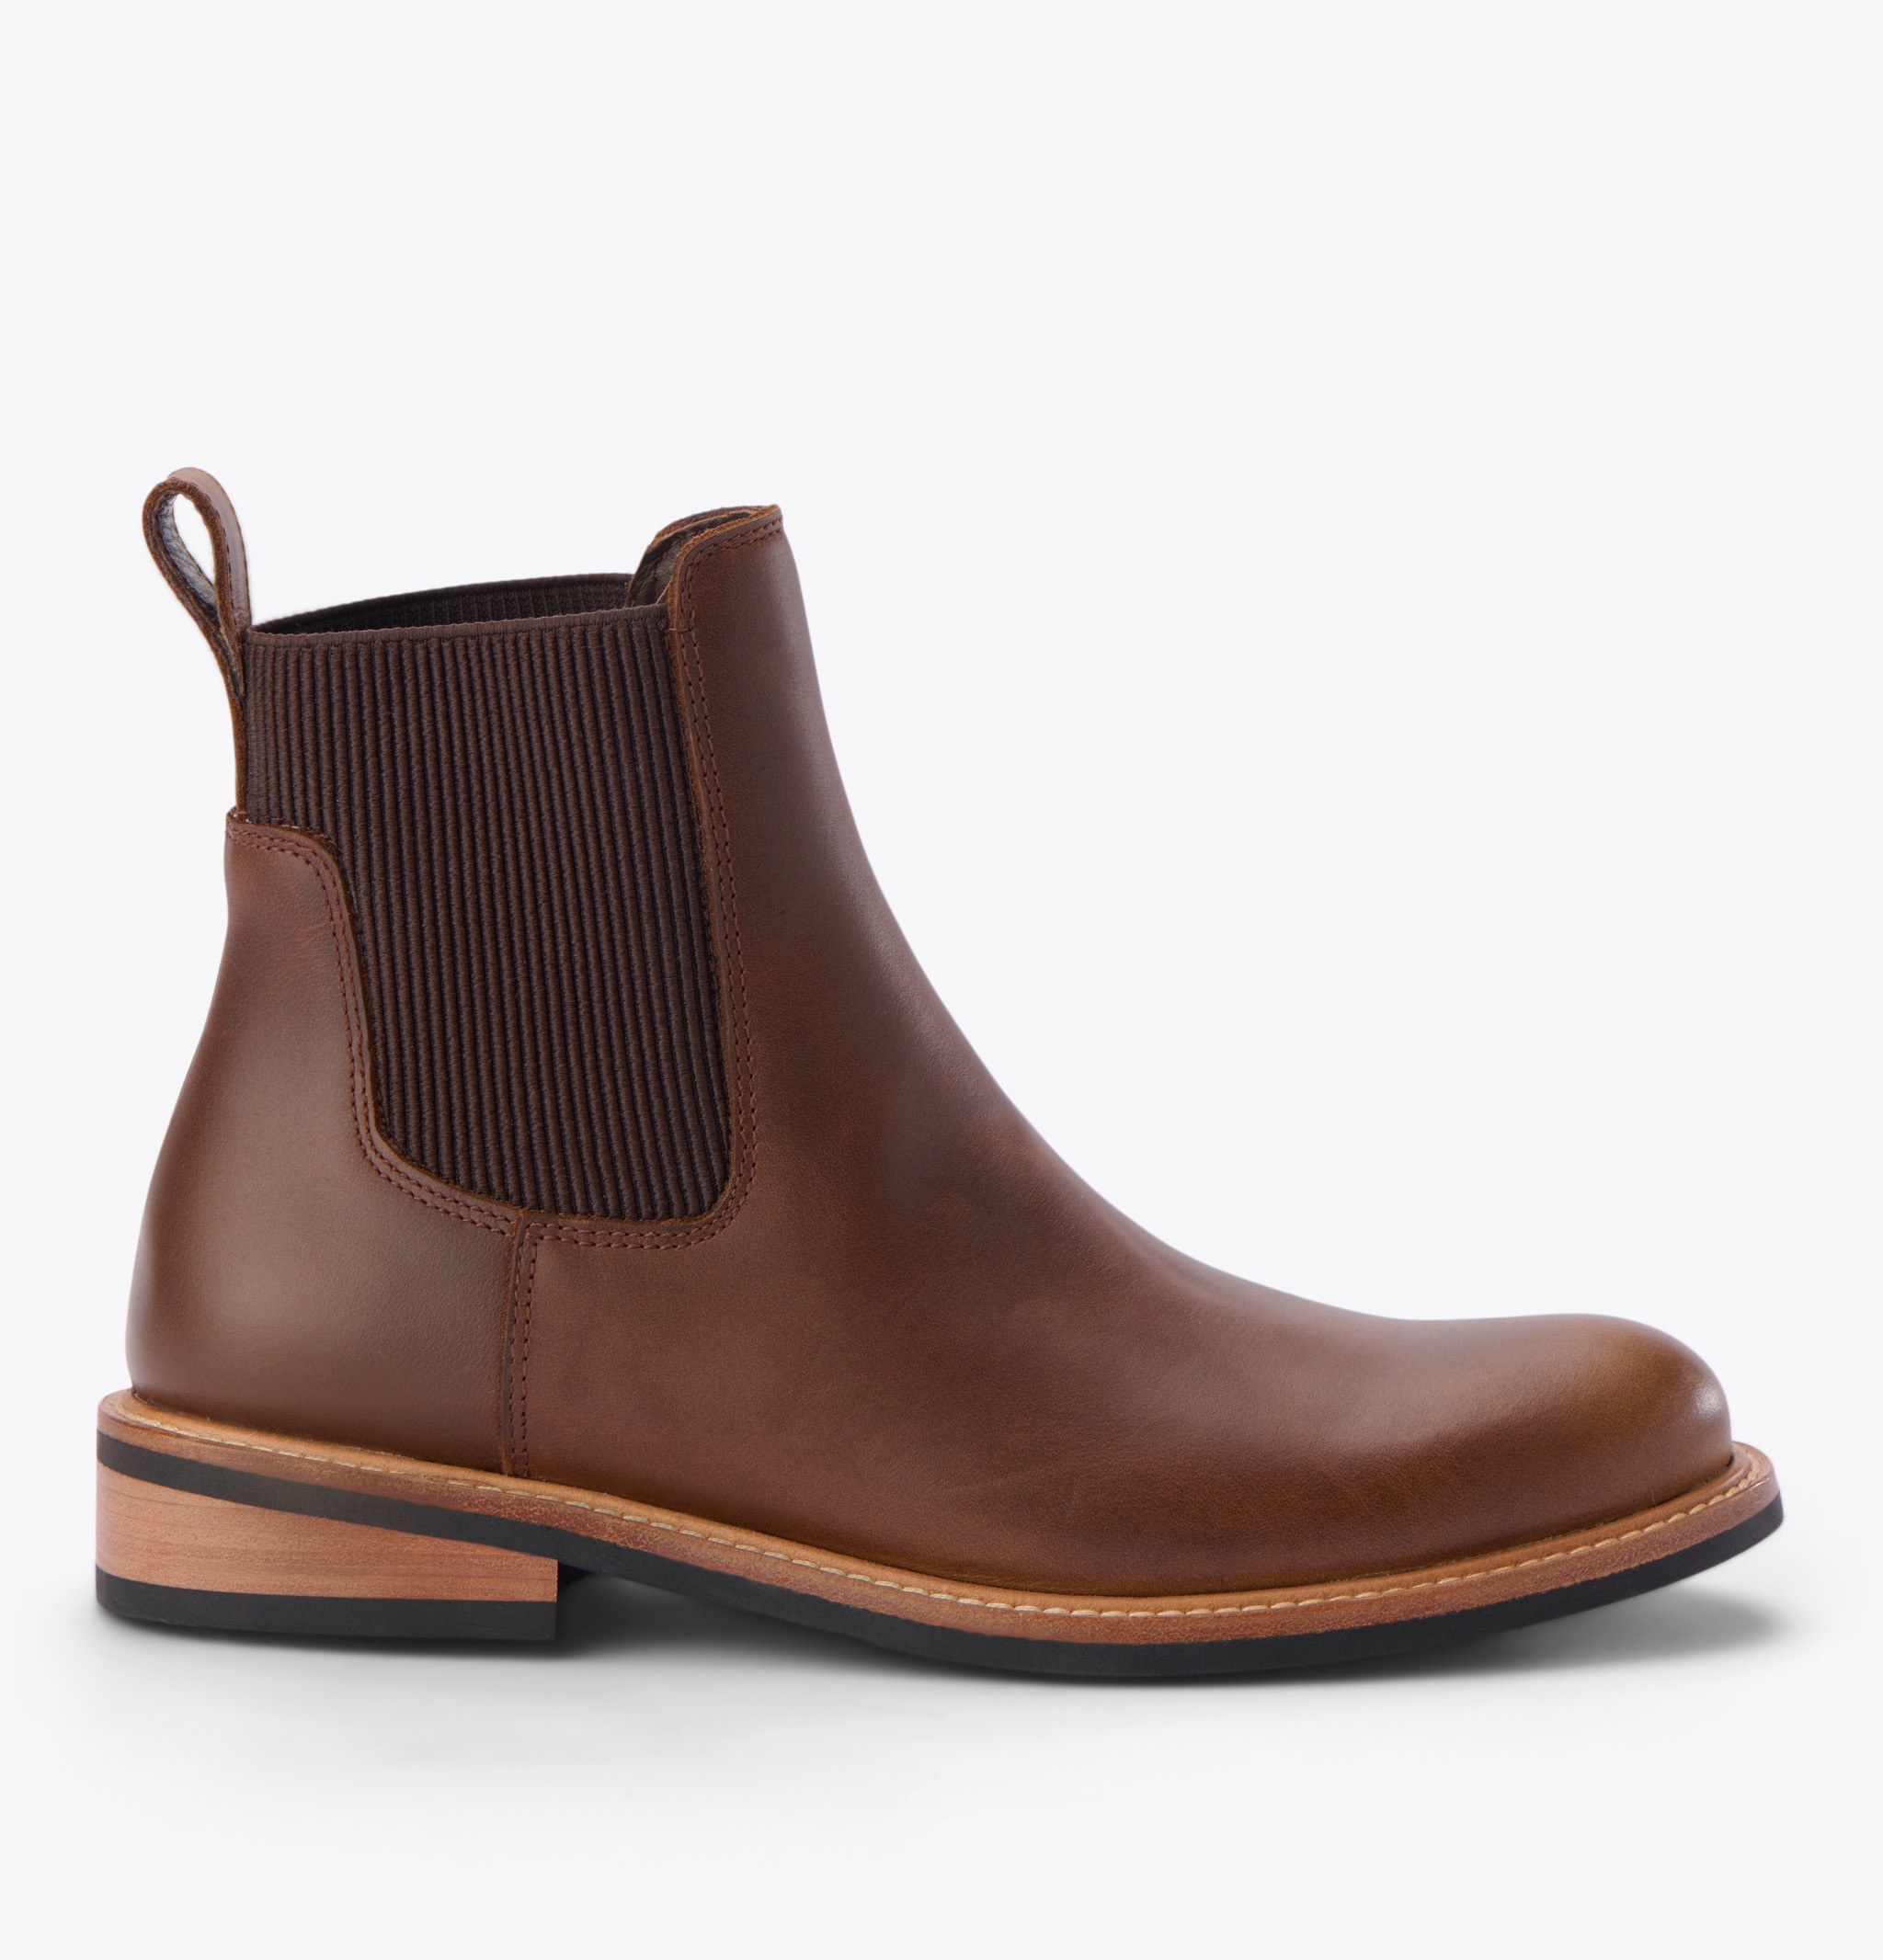 Nisolo Carmen Chelsea Boot Brown - Every Nisolo product is built on the foundation of comfort, function, and design. 